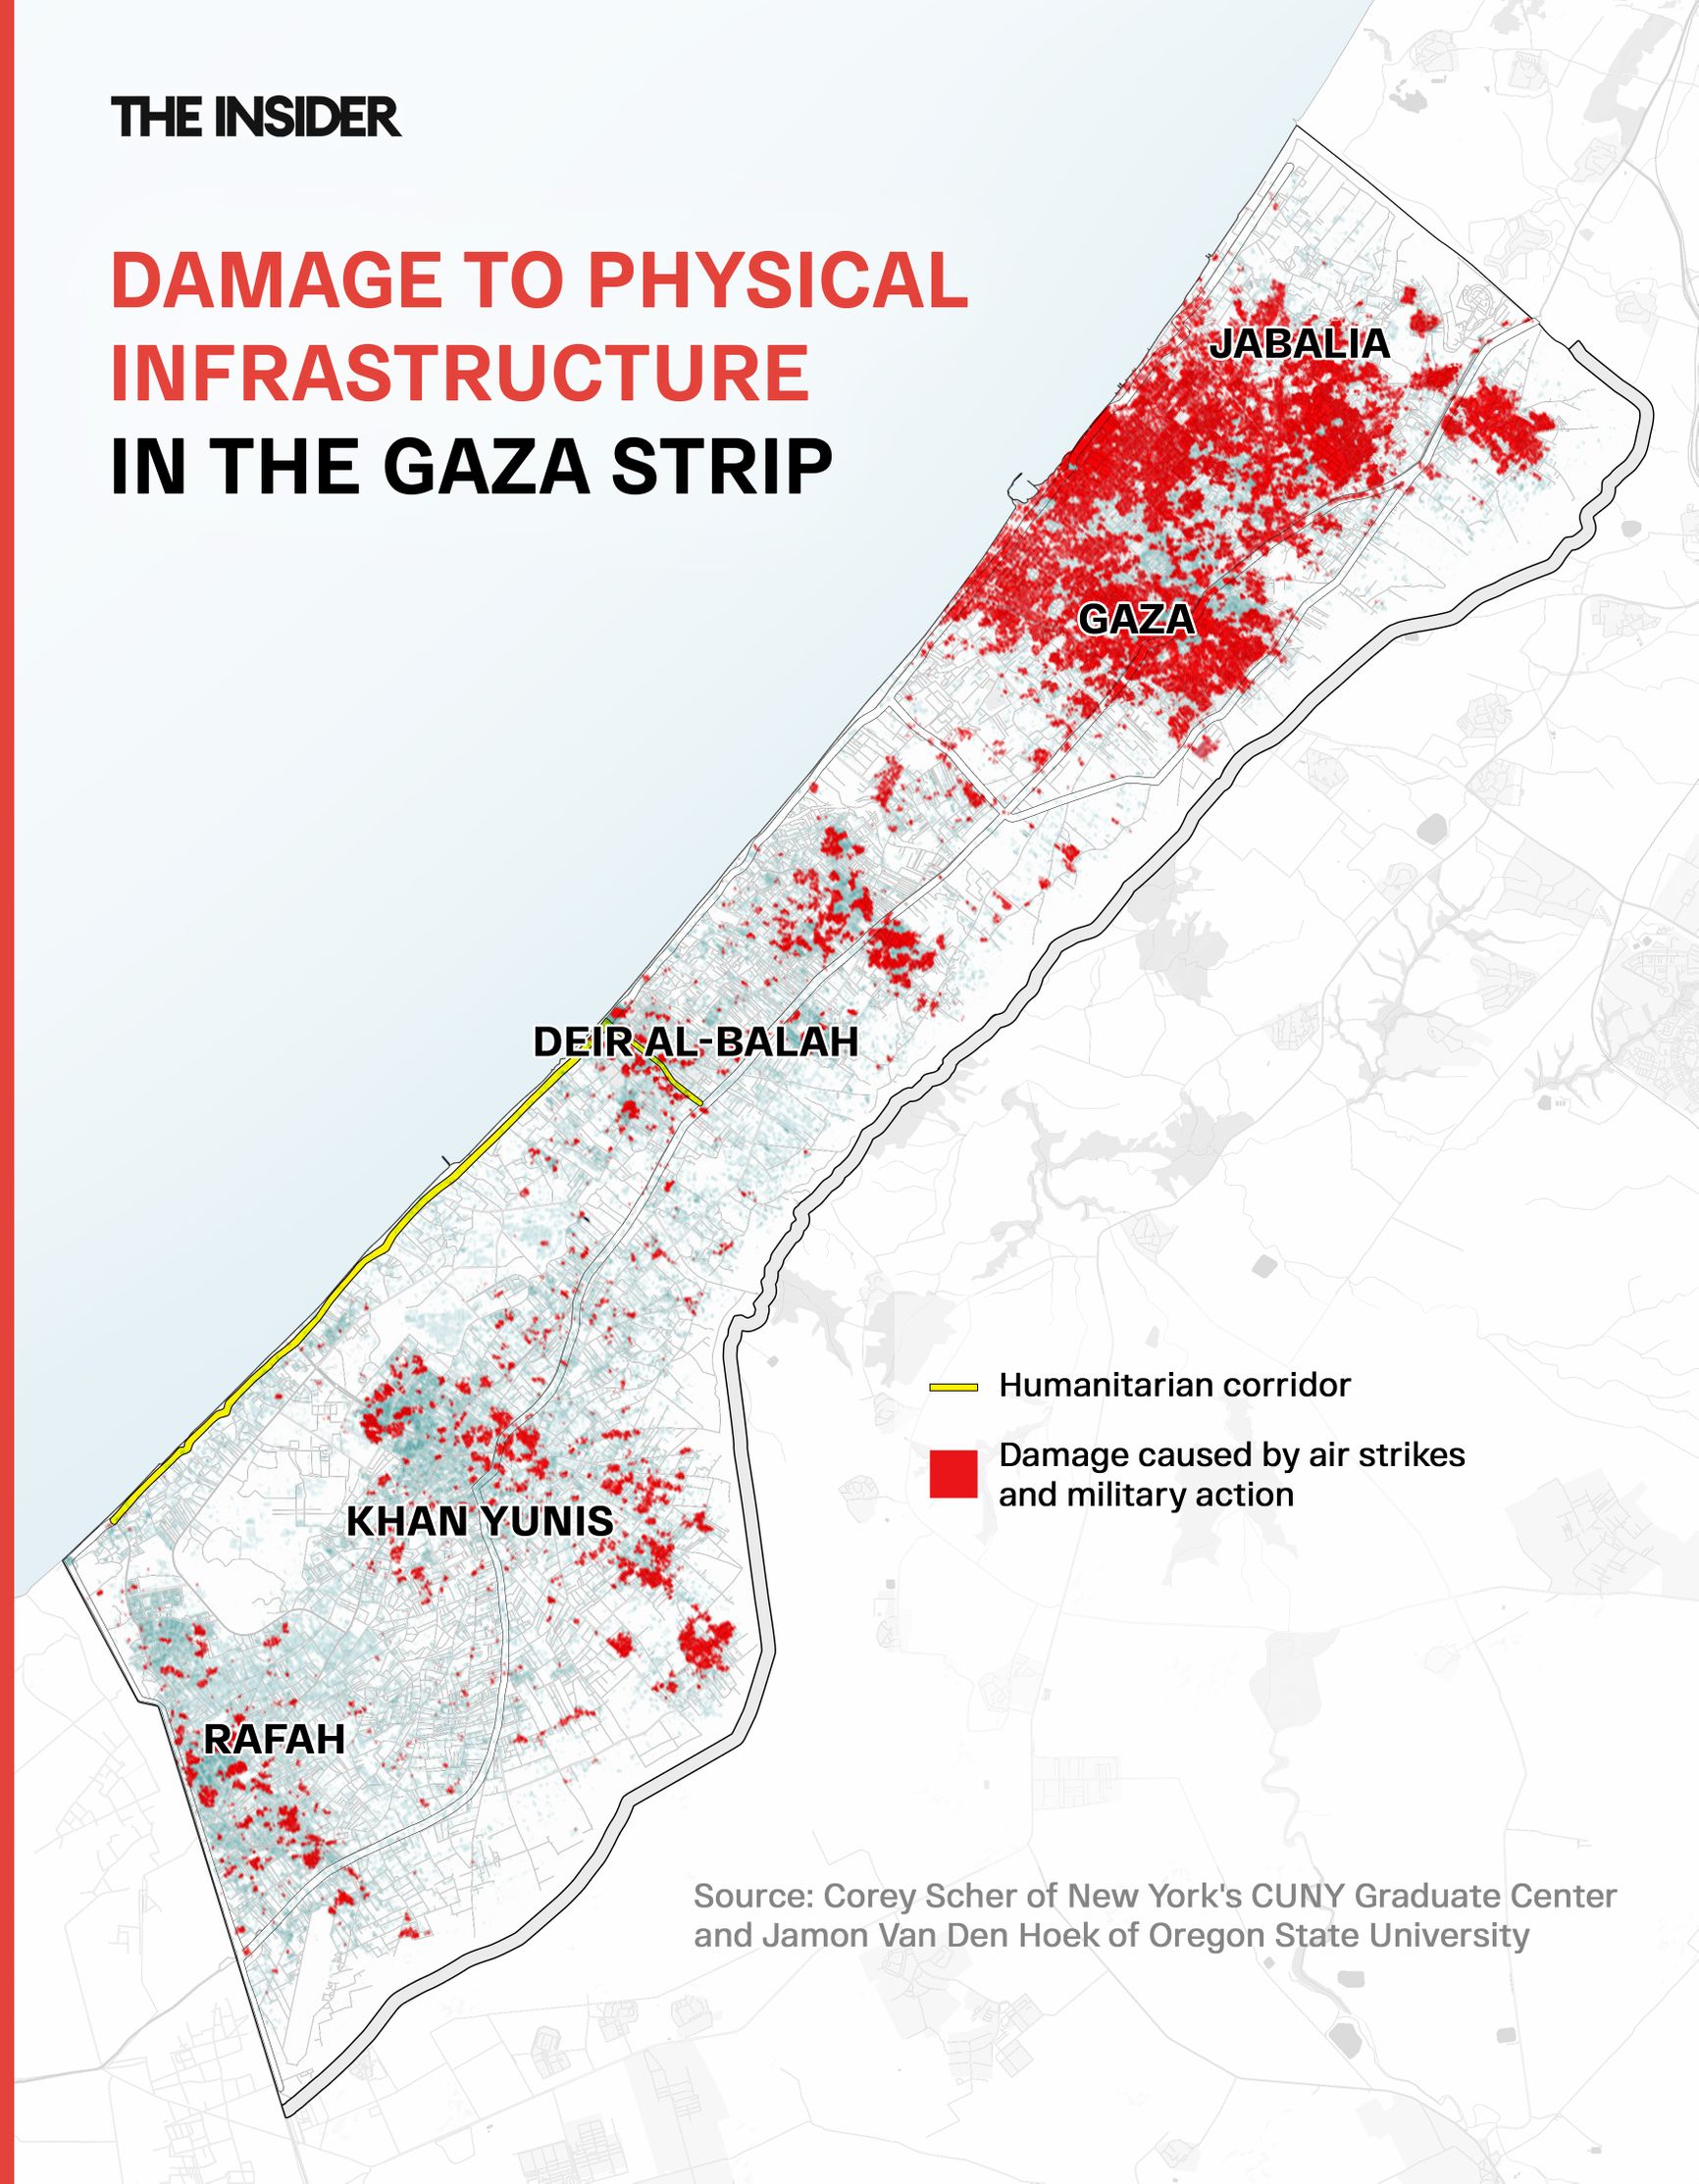 Damage to physical infrastructure in the Gaza Strip